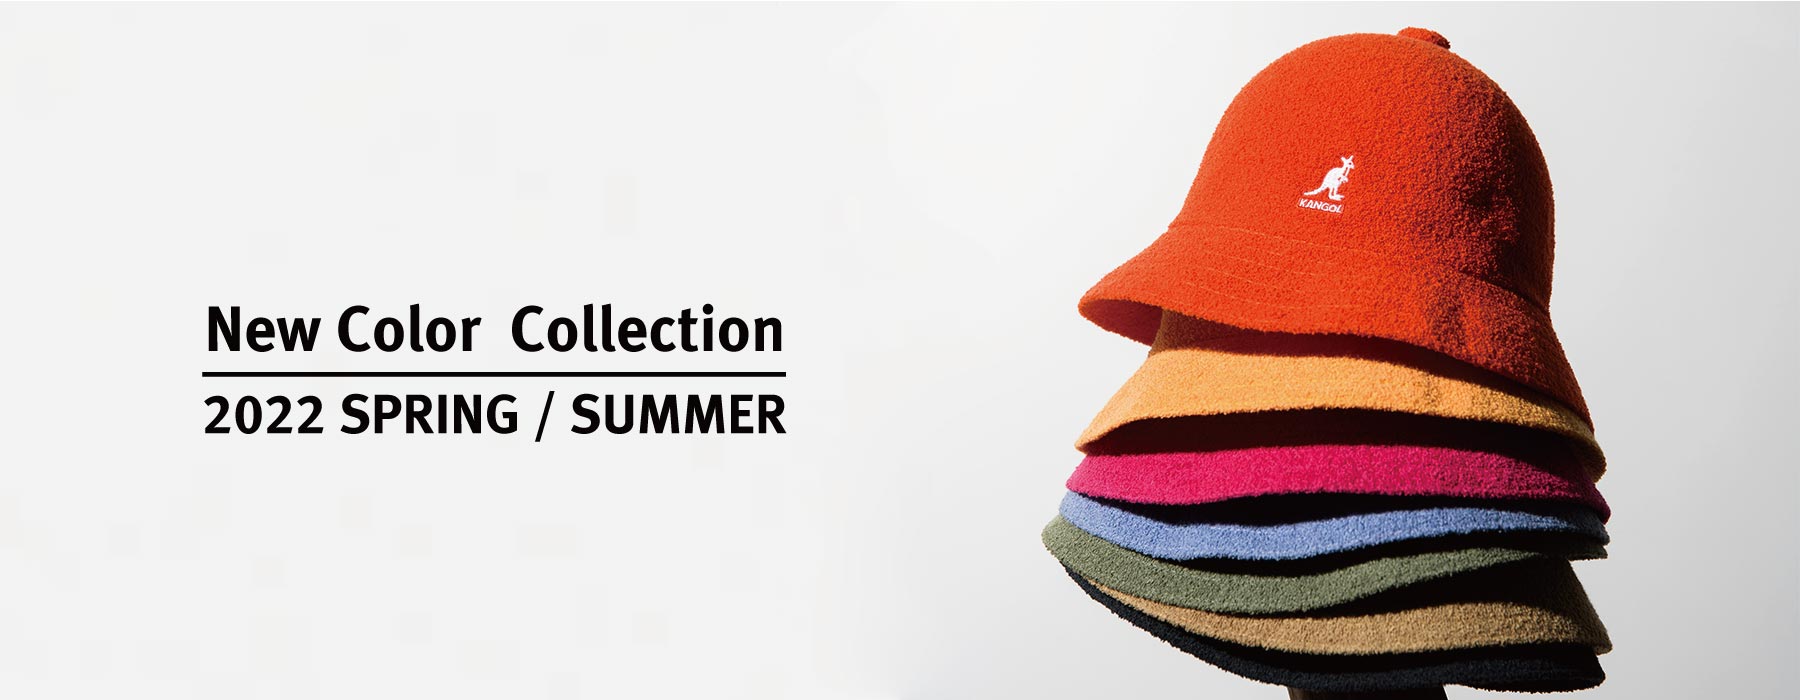 【2022S/S New Color Collection】

